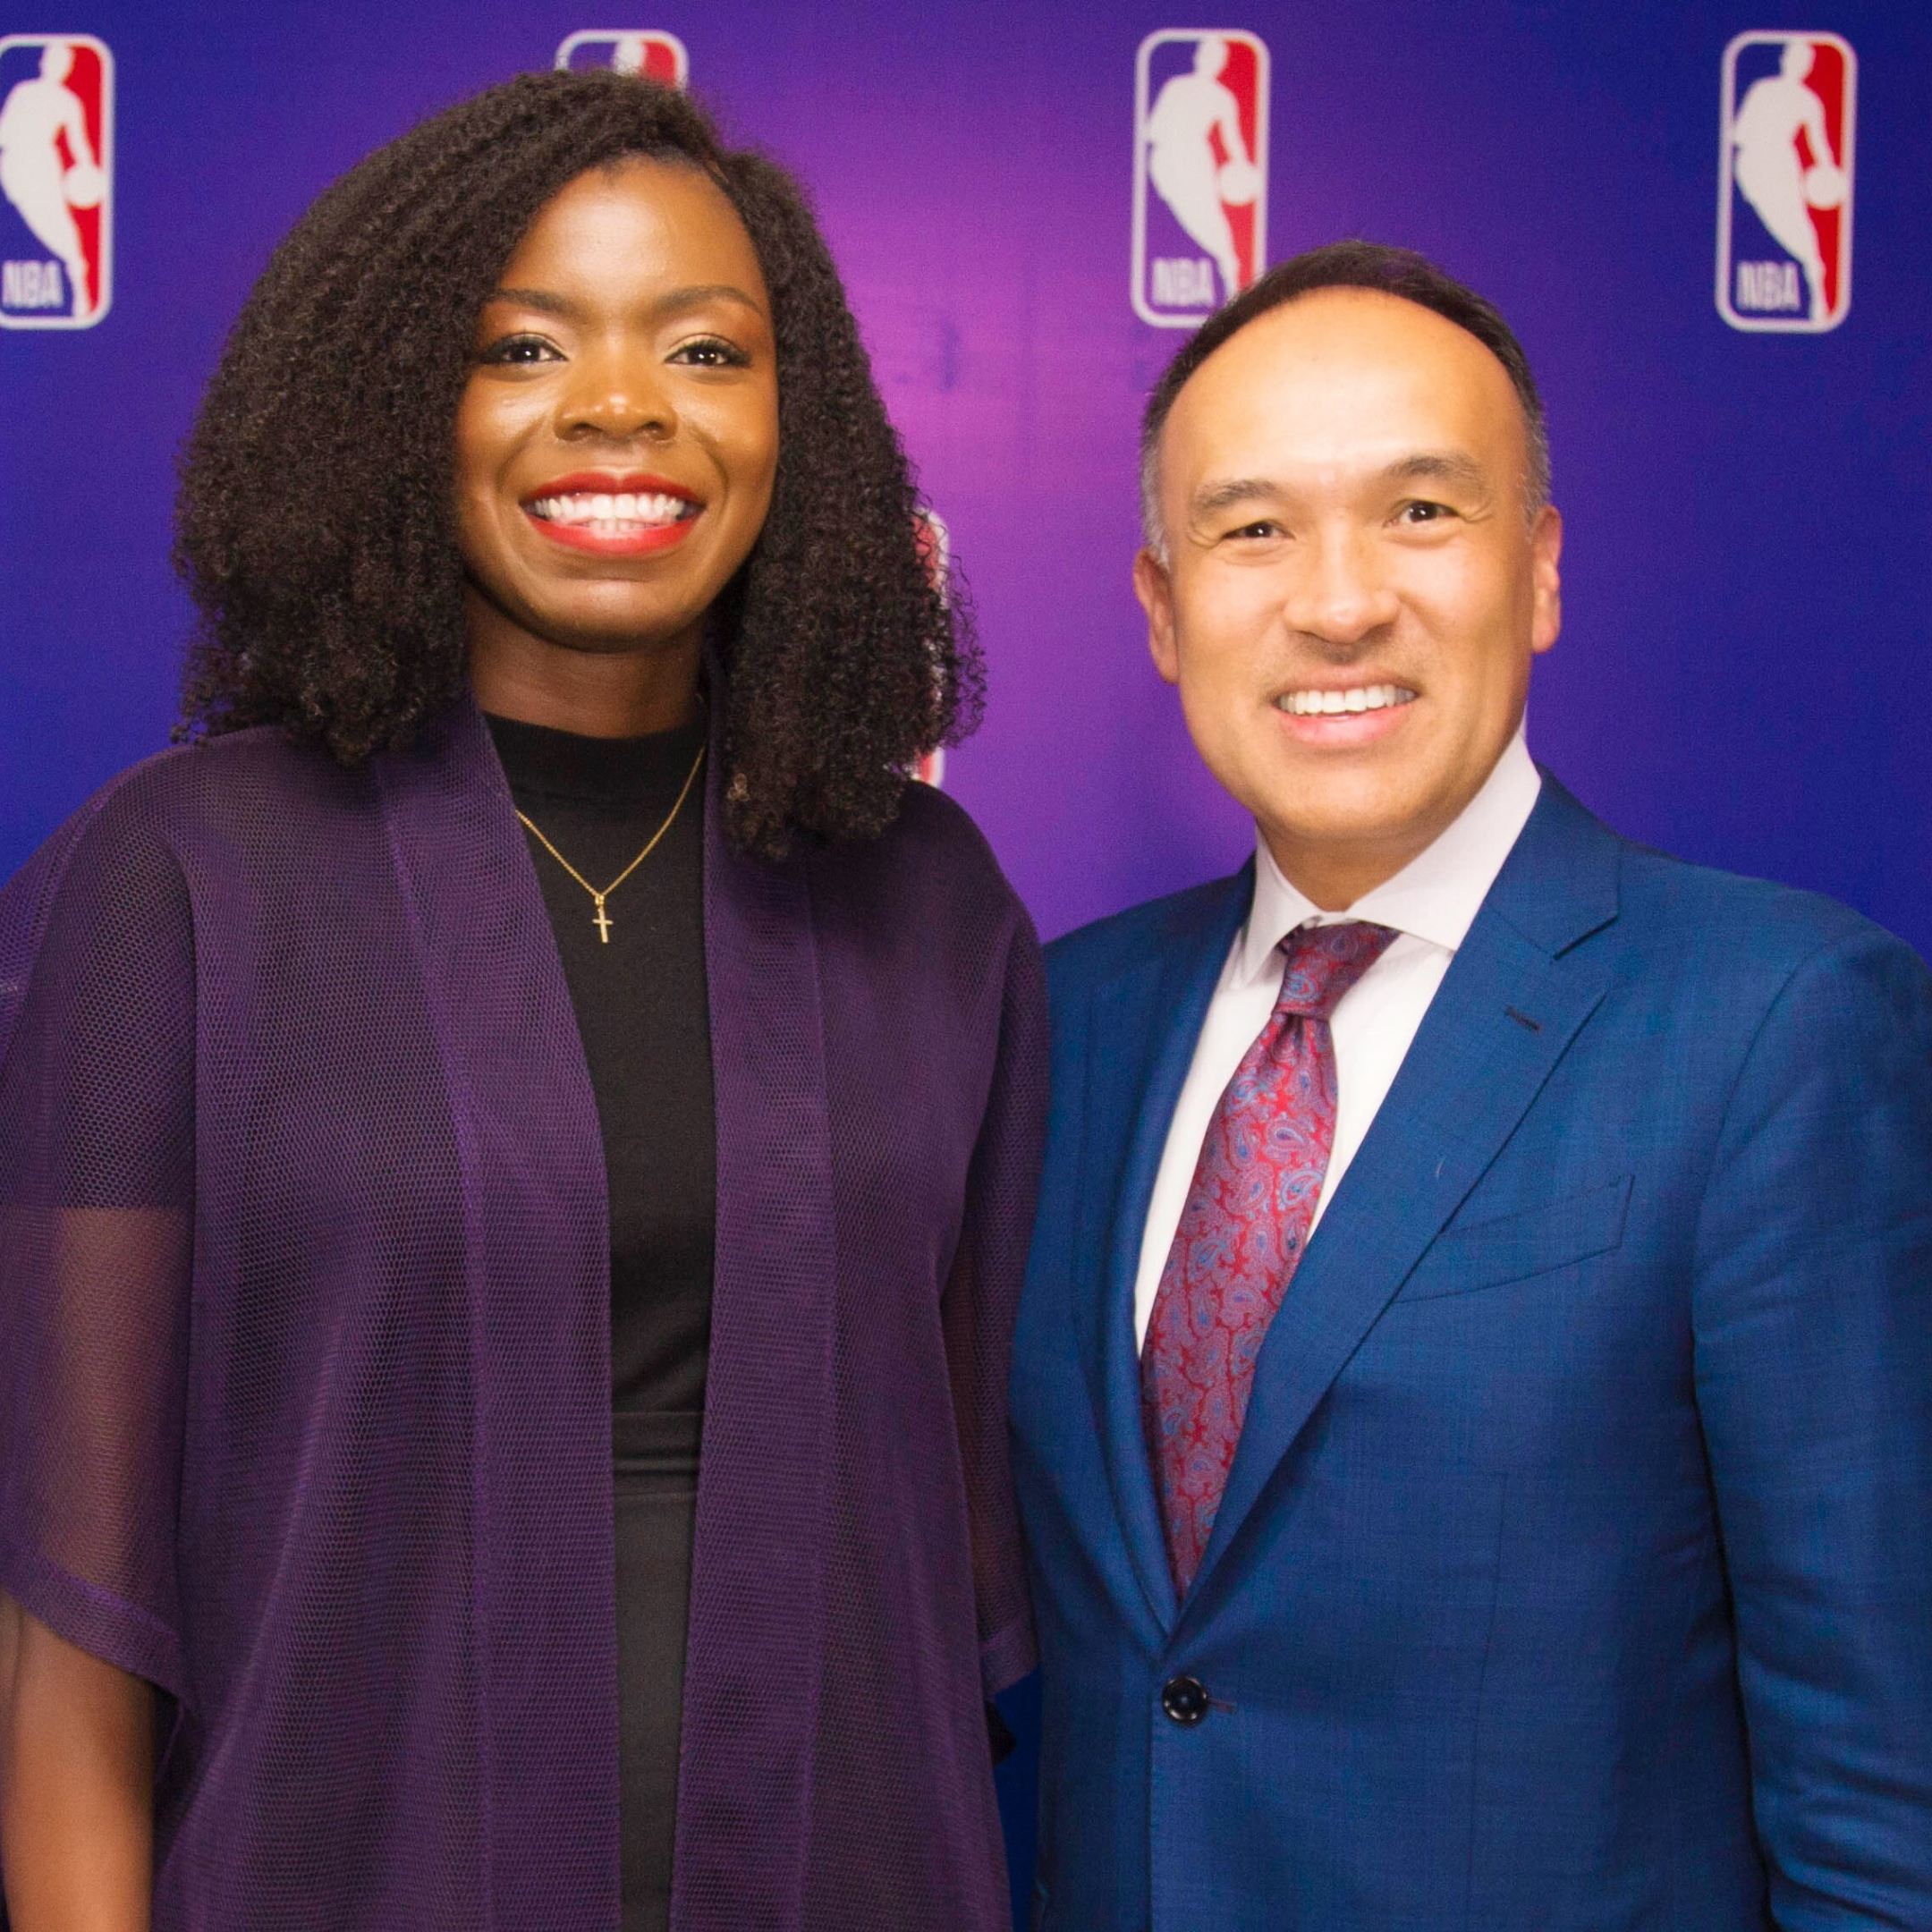 Meet Gbemi Abudu: The Basketball Ace Leading the Expansion of NBA in Nigeria